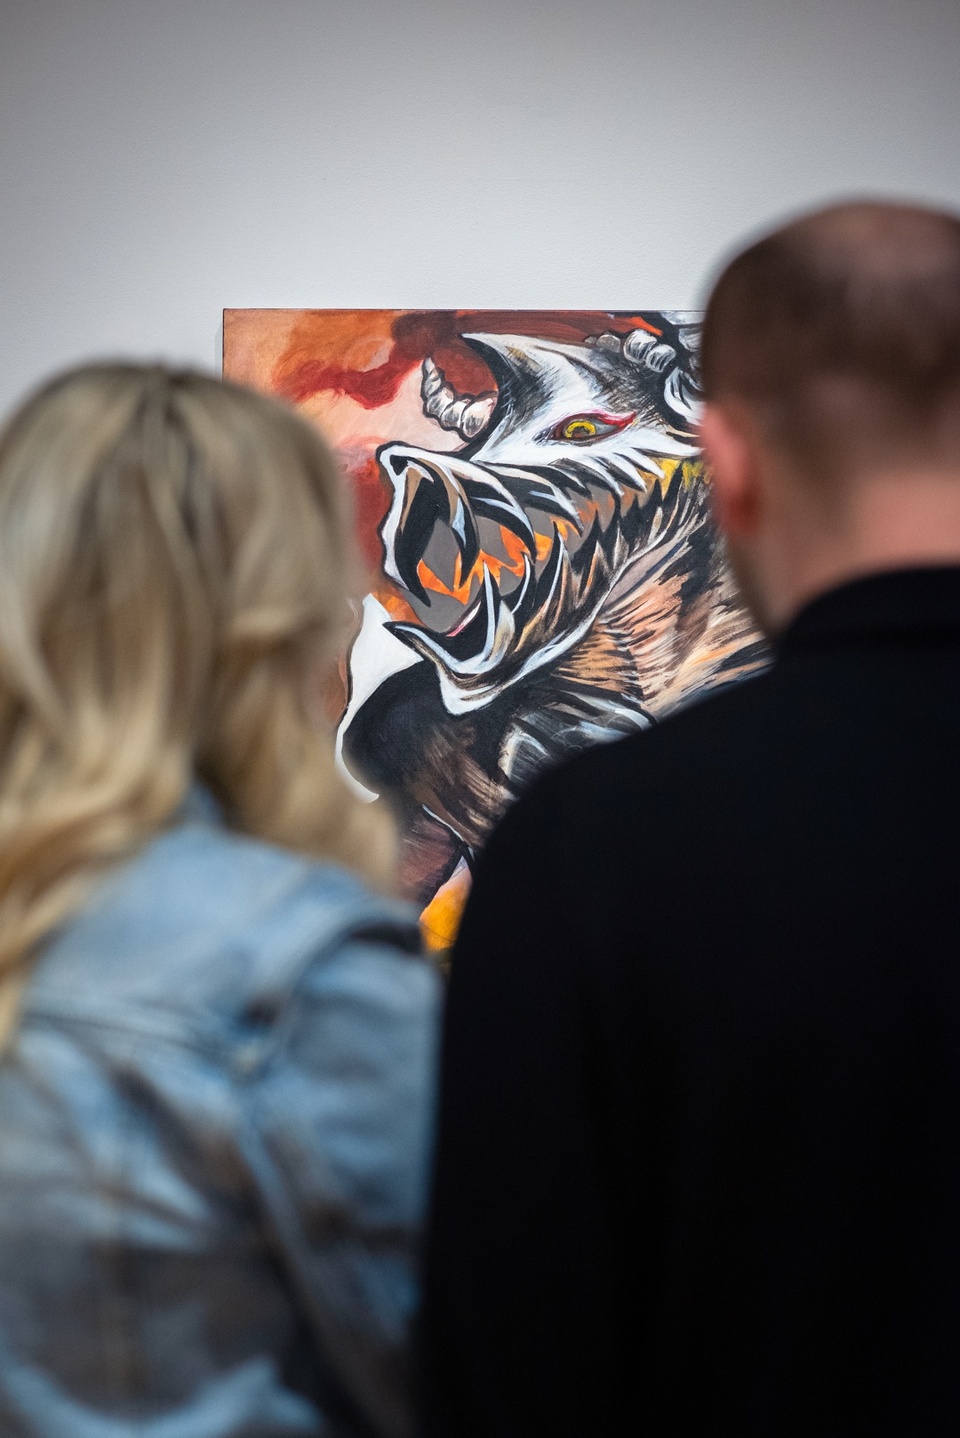 Over the shoulder view of a grey and orange painting of a skeletal-looking dragon-like creature snarling.